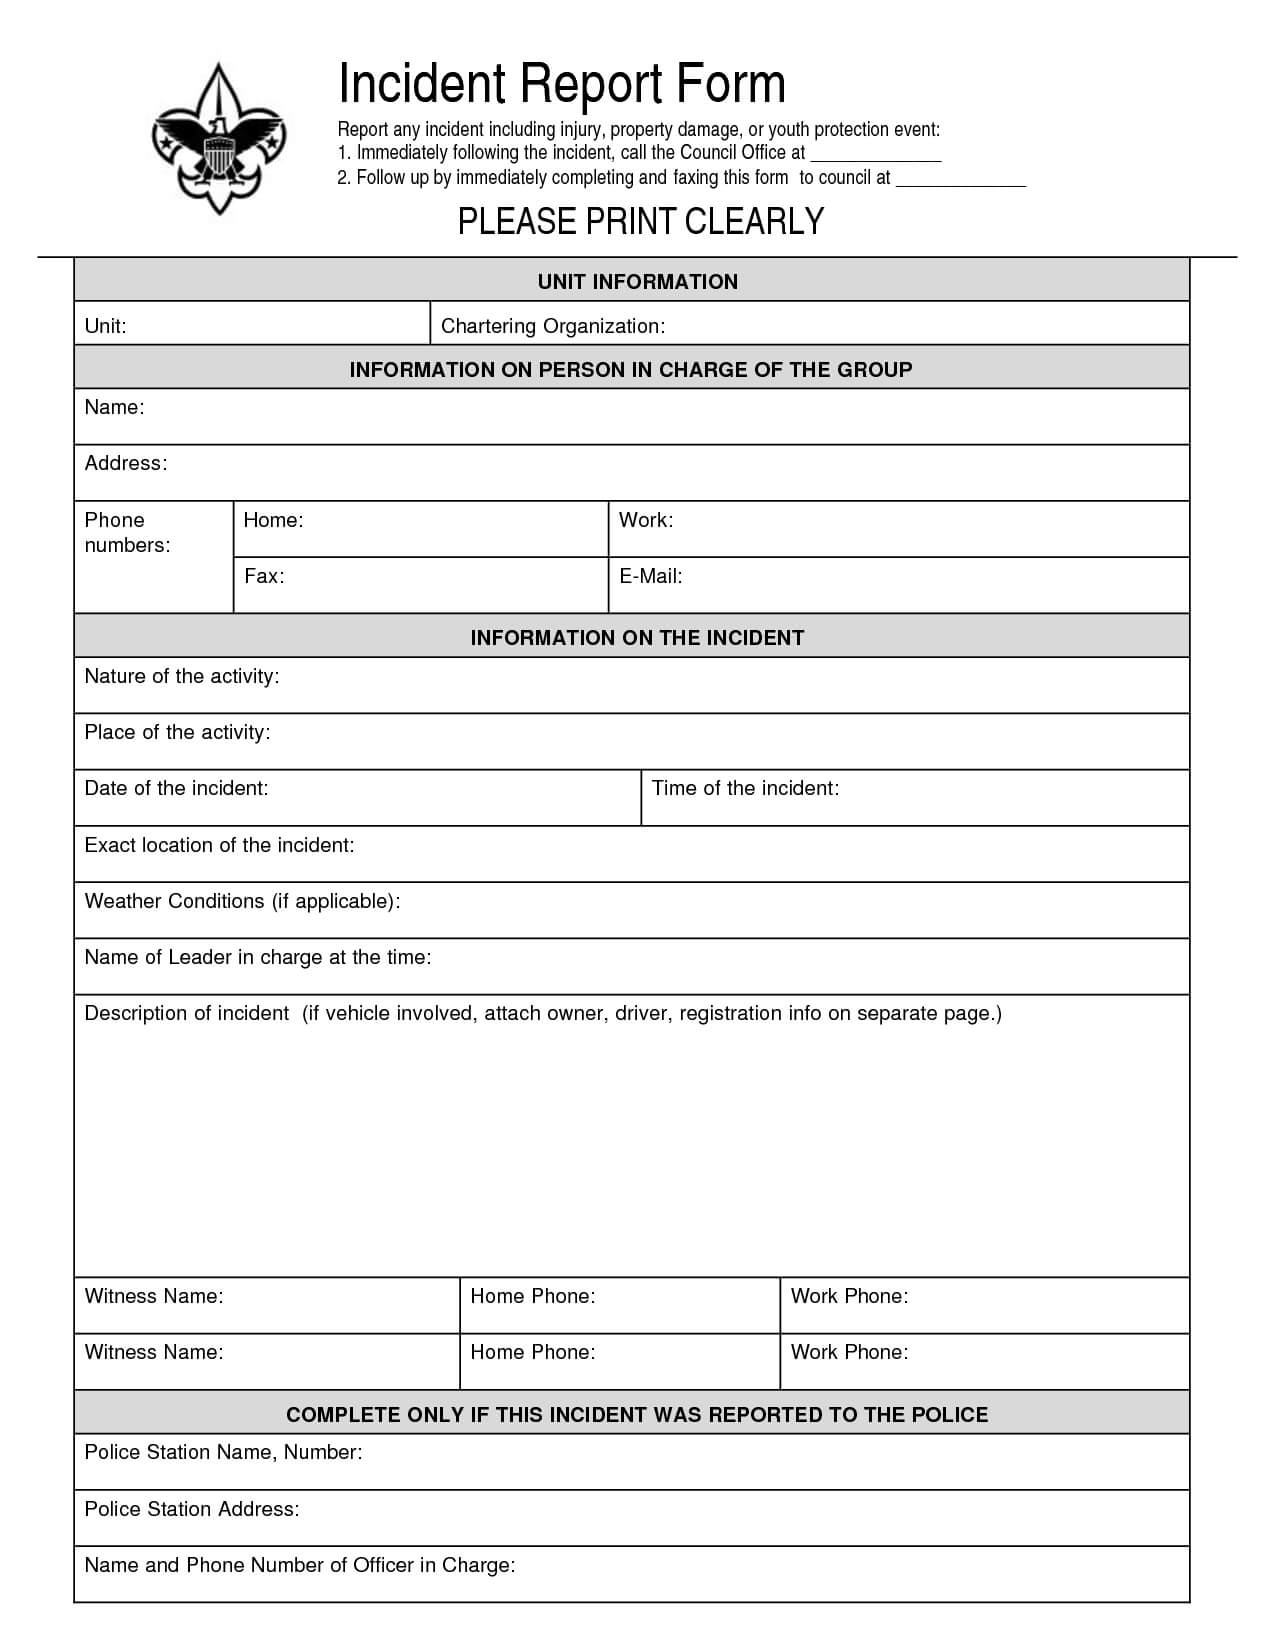 Medical Incident Report Form Template | Incident Report Intended For Megger Test Report Template